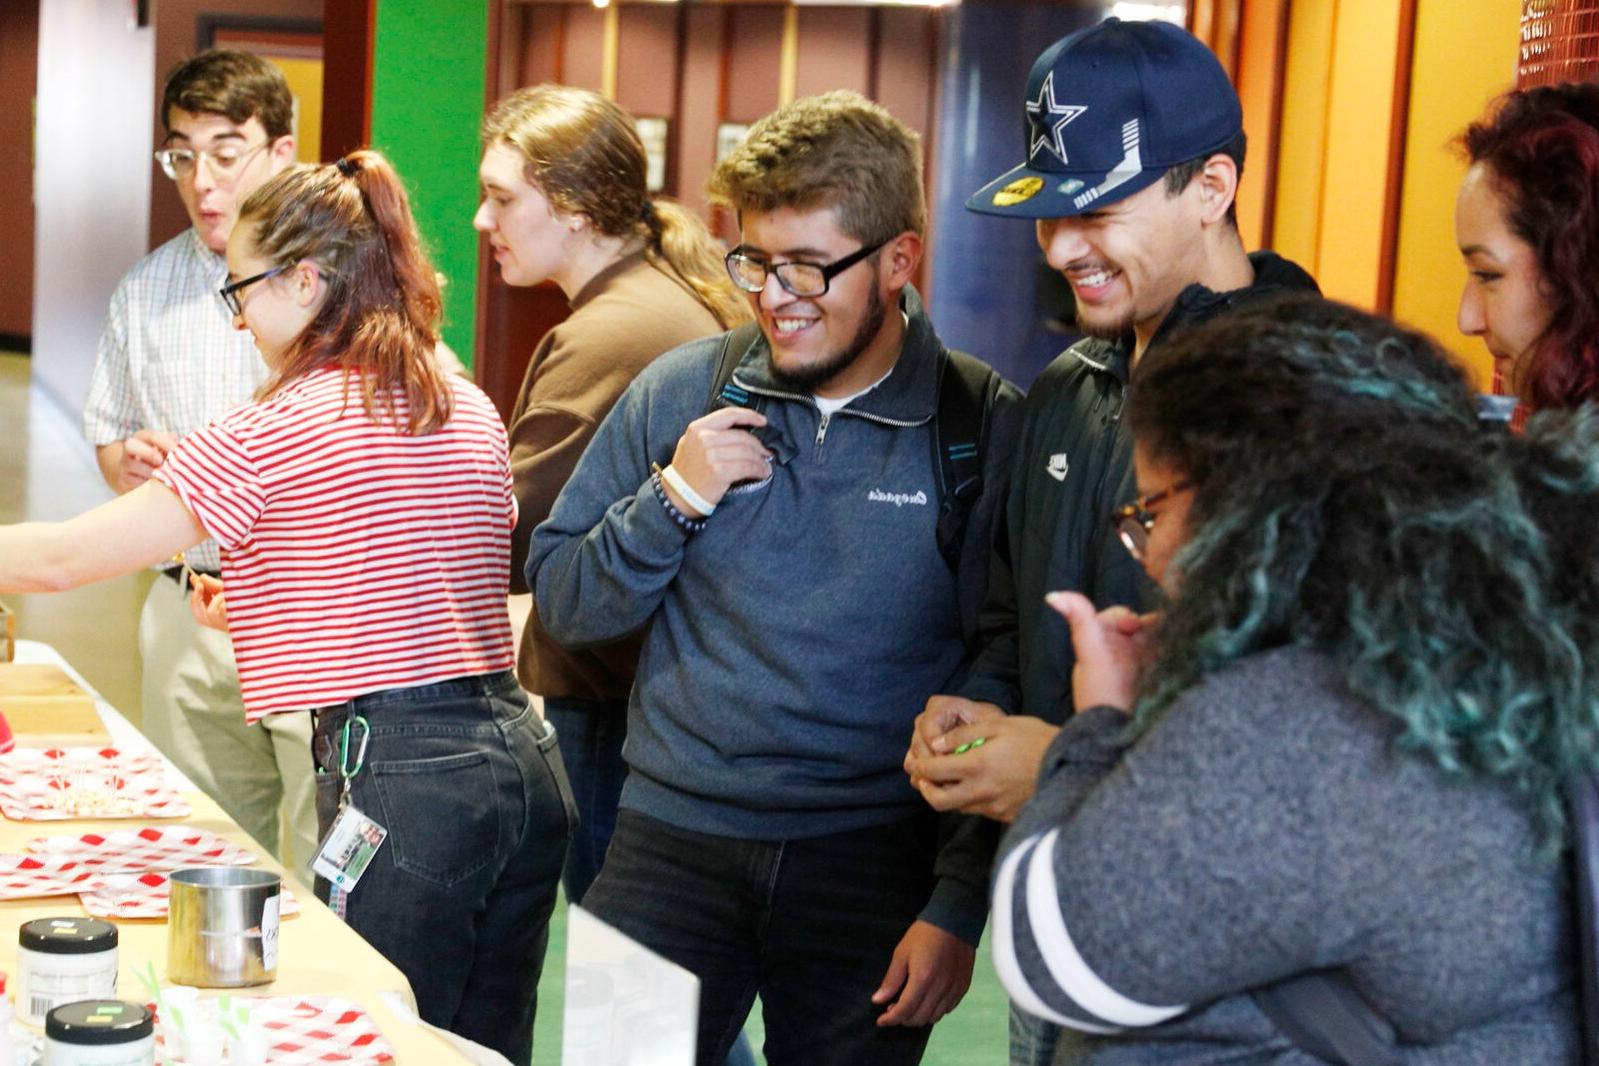 Students enjoy samples from local vendors at a farmers market-themed dinner.